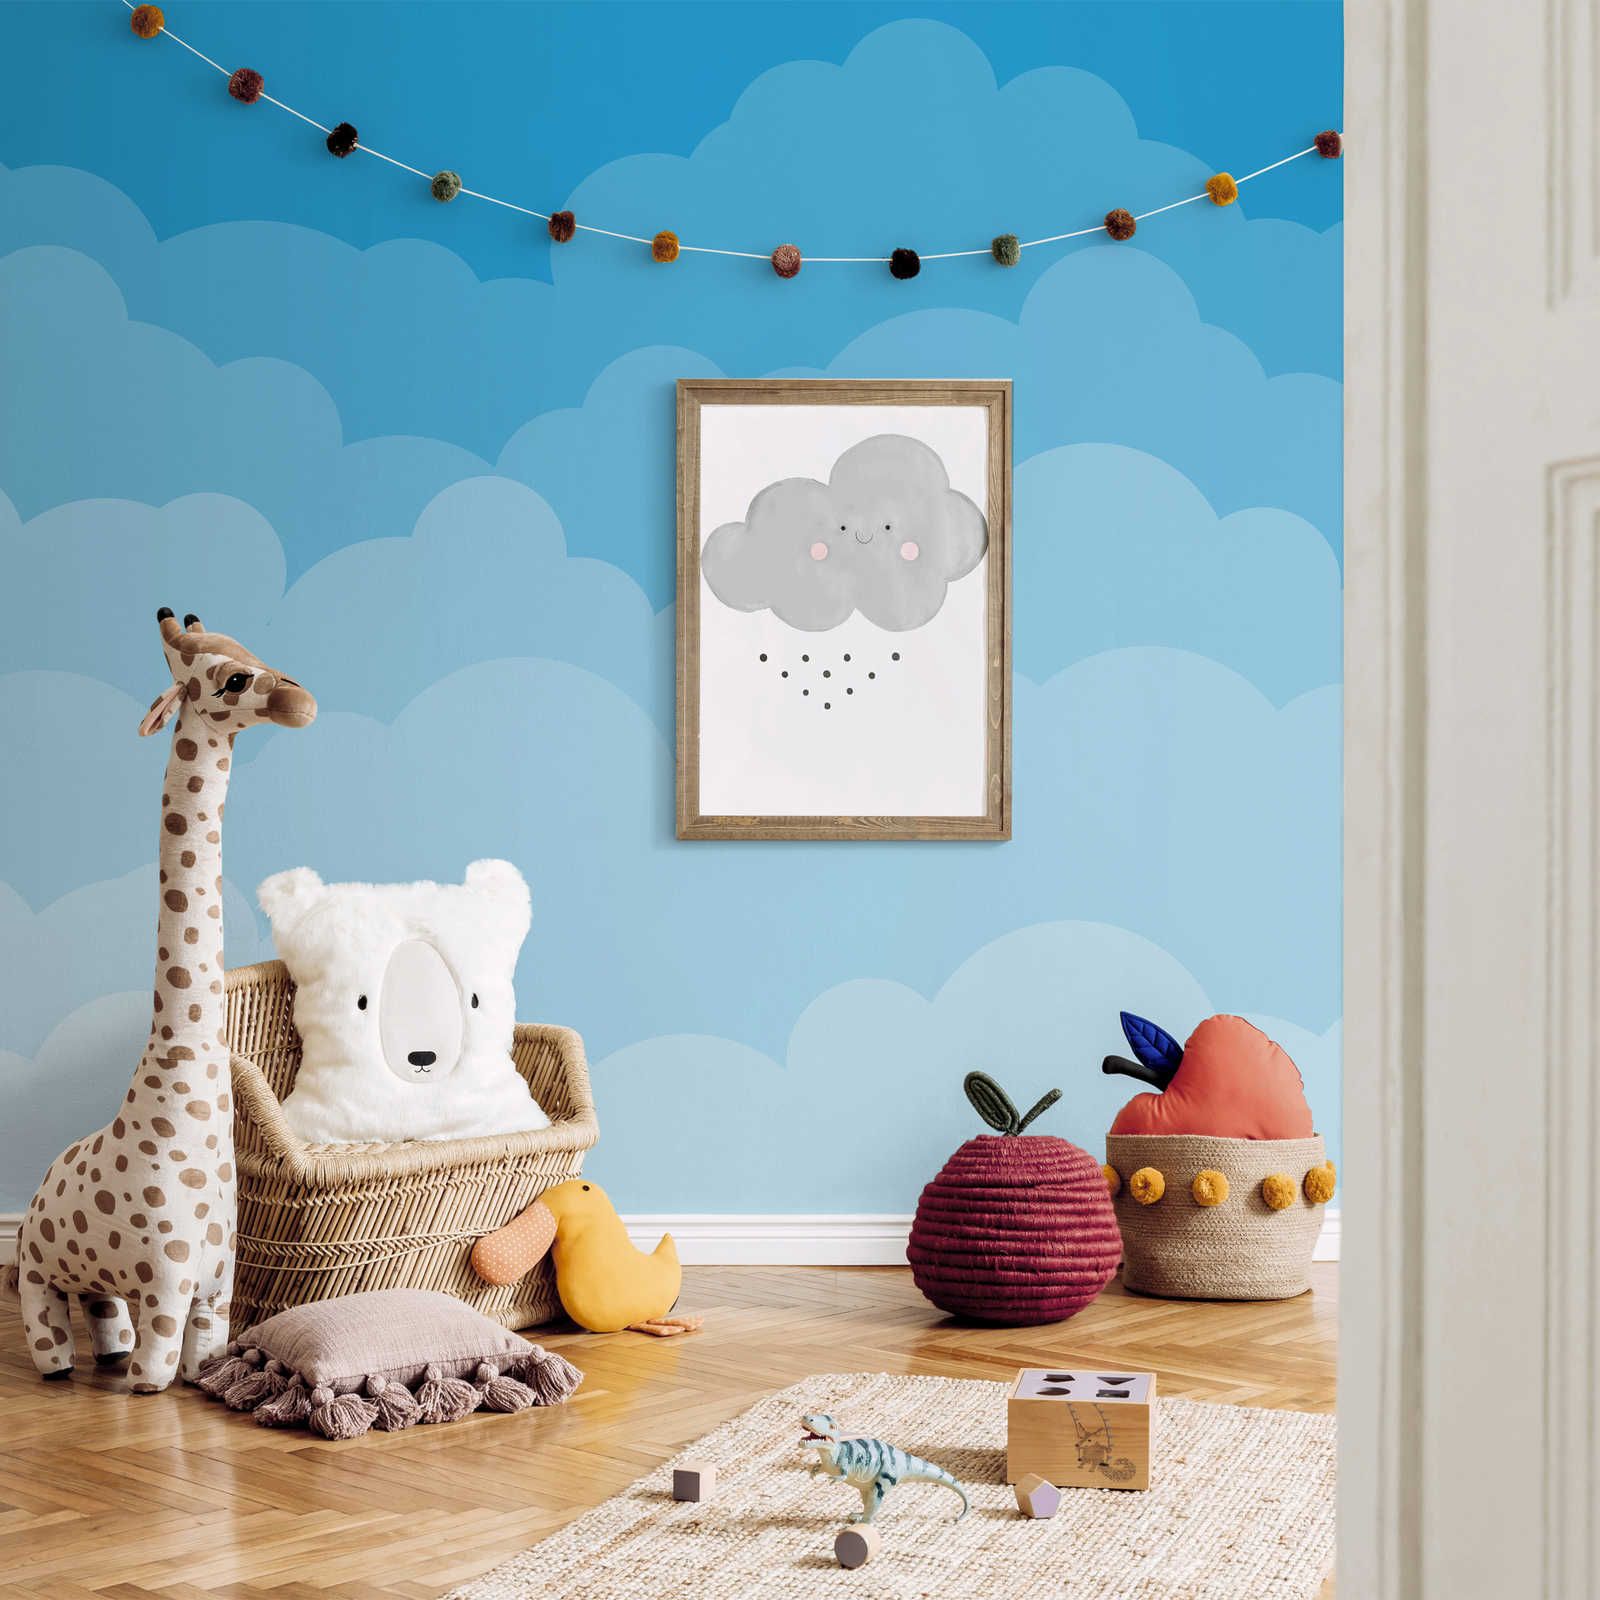         Photo wallpaper Sky with clouds in comic style - Smooth & matt non-woven
    